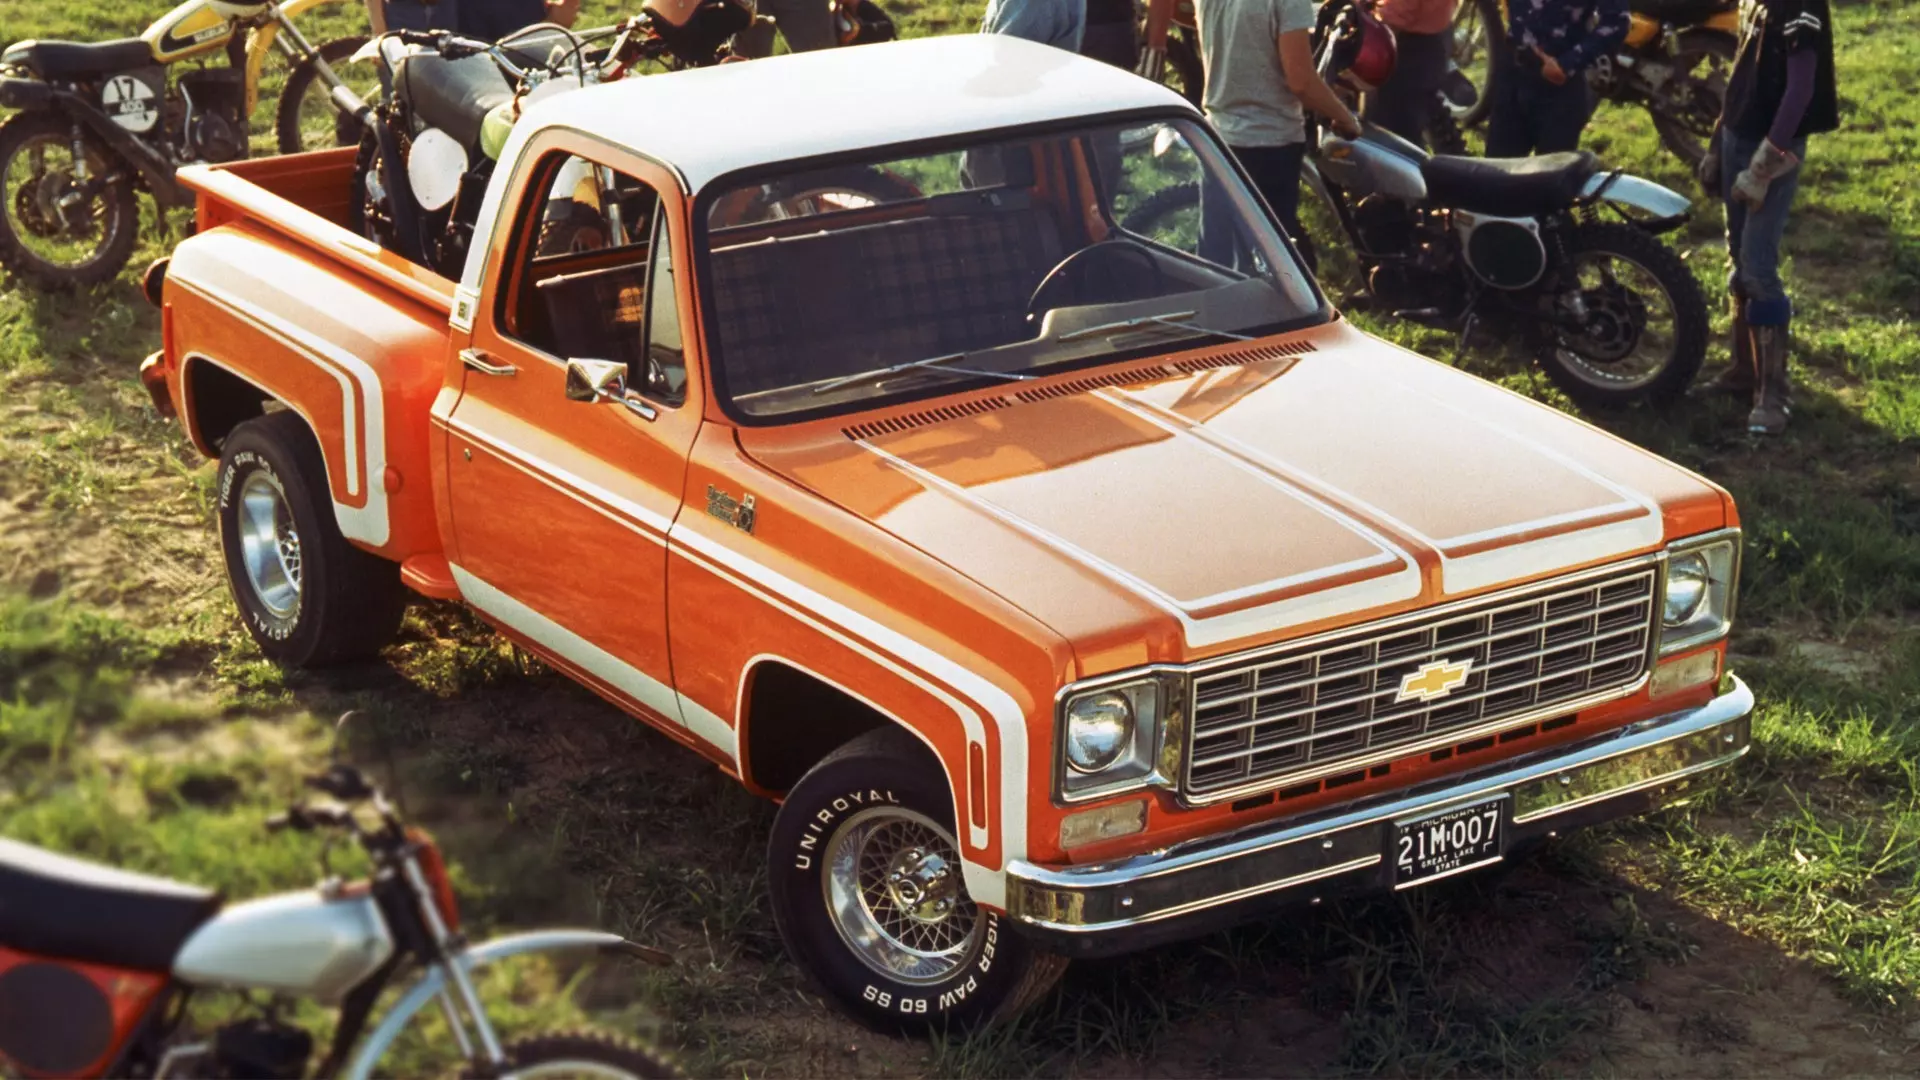 It Doesn’t Get More 1970 Something Than an Orange Stepside Pickup Truck